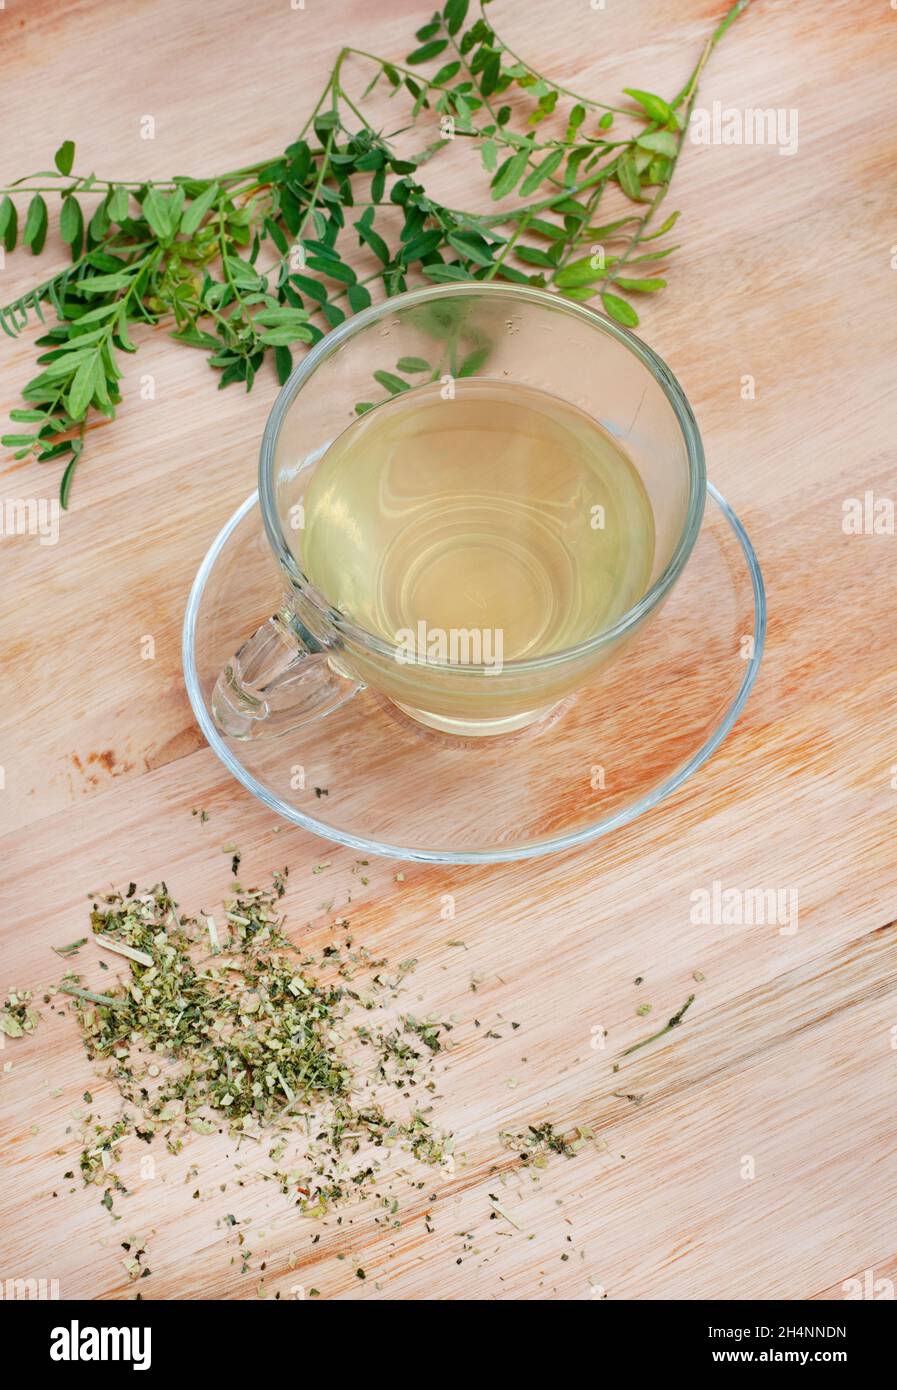 Cancer bush tea, traditional herbal medicine made from Sutherlandia plant Stock Photo